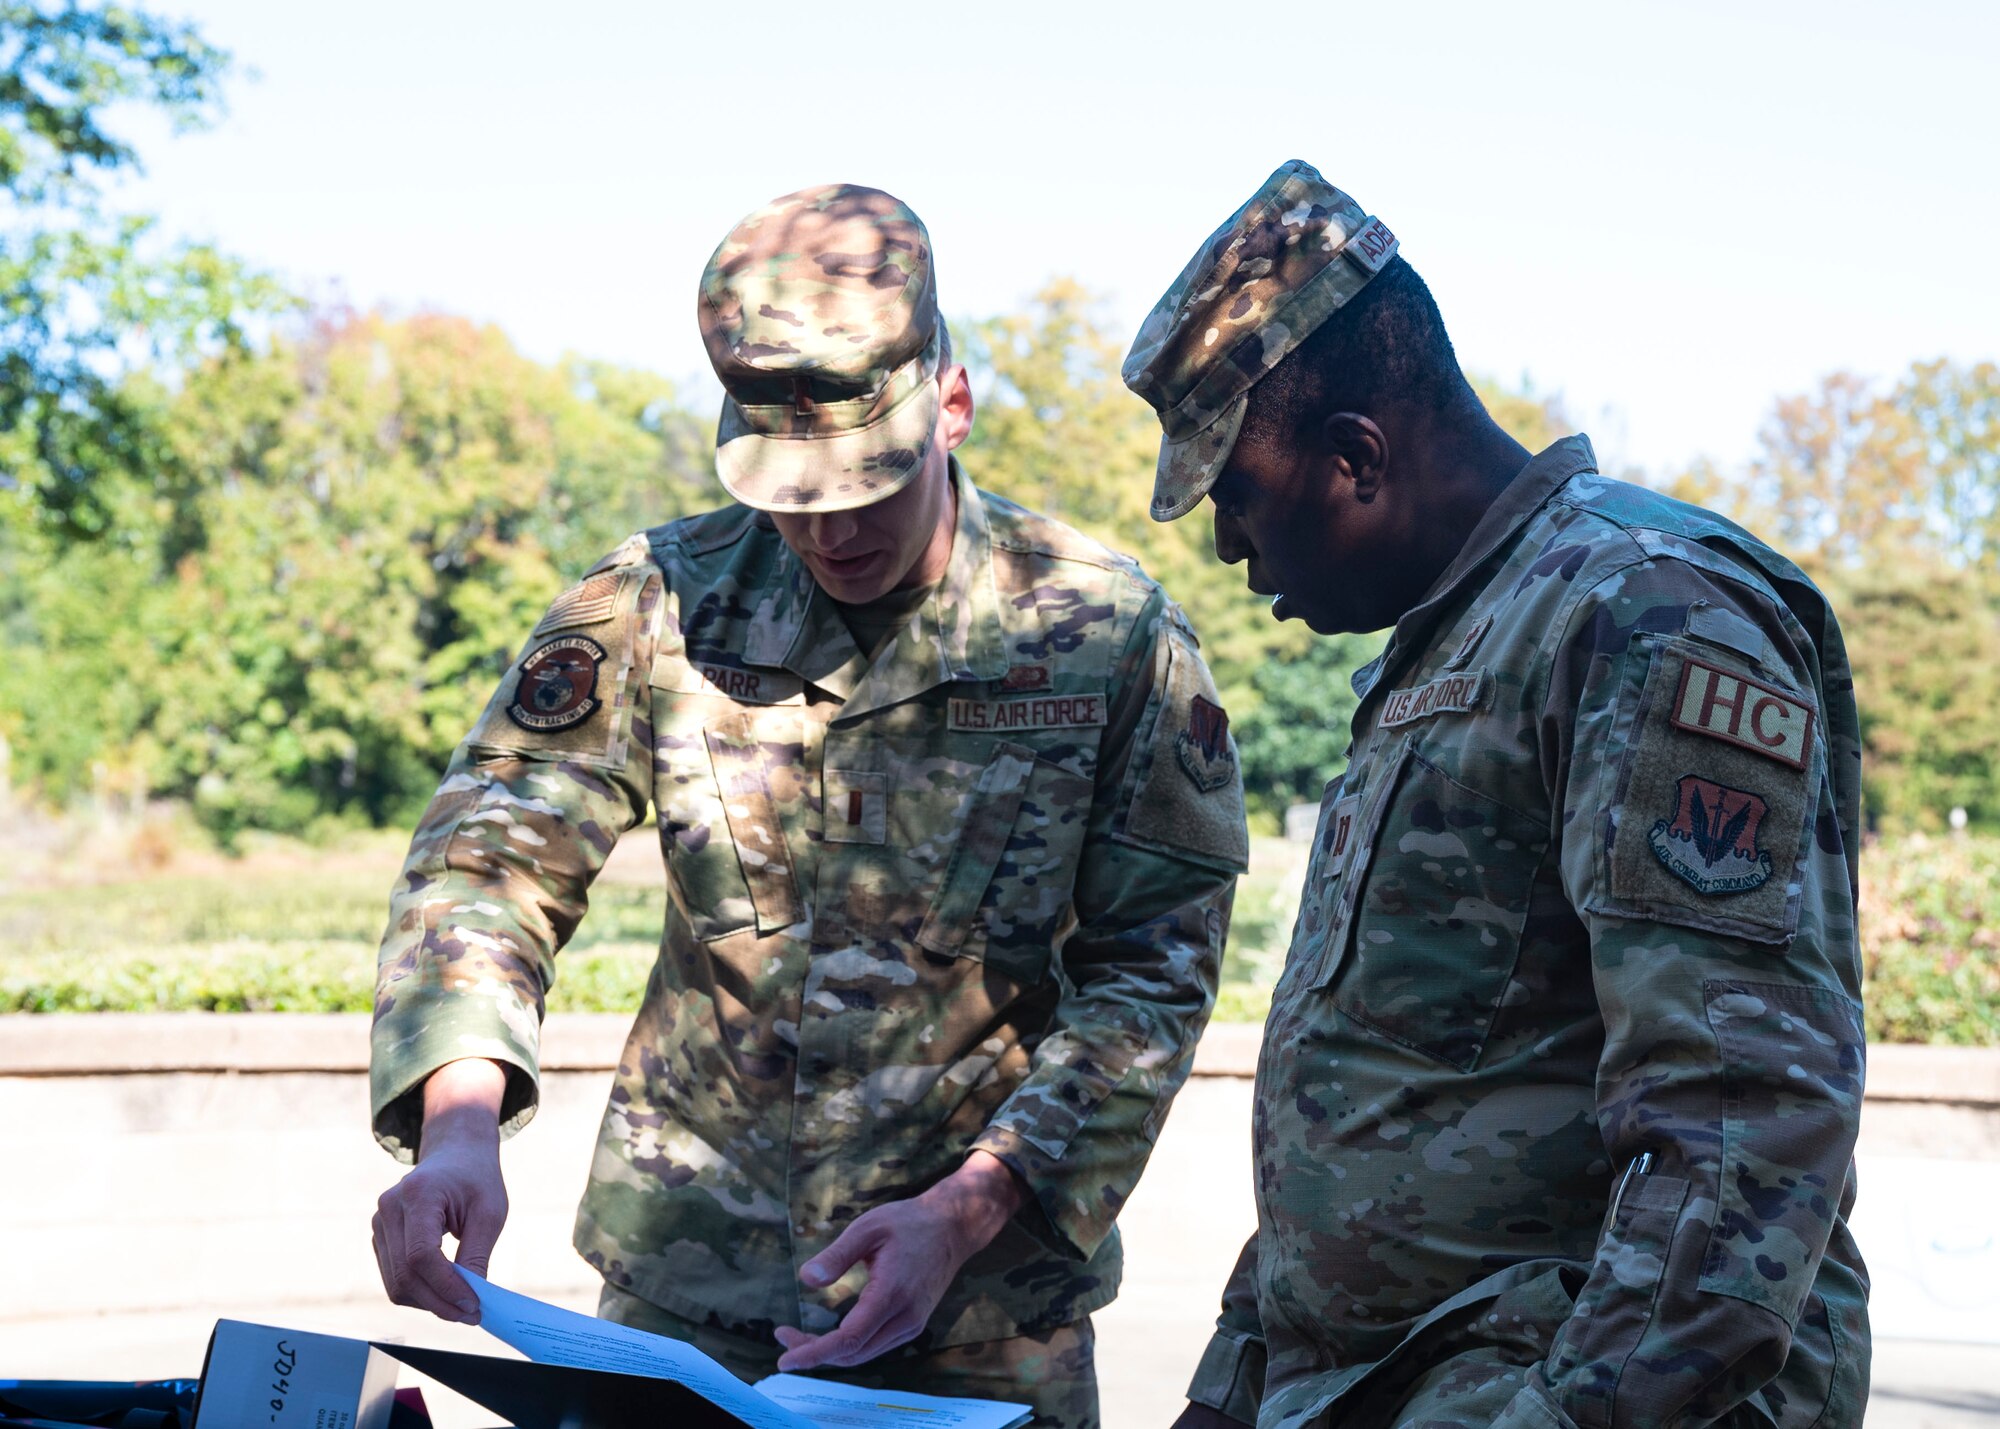 AbilityOne event coordinator reviews document with 20th Fighter Wing chaplain